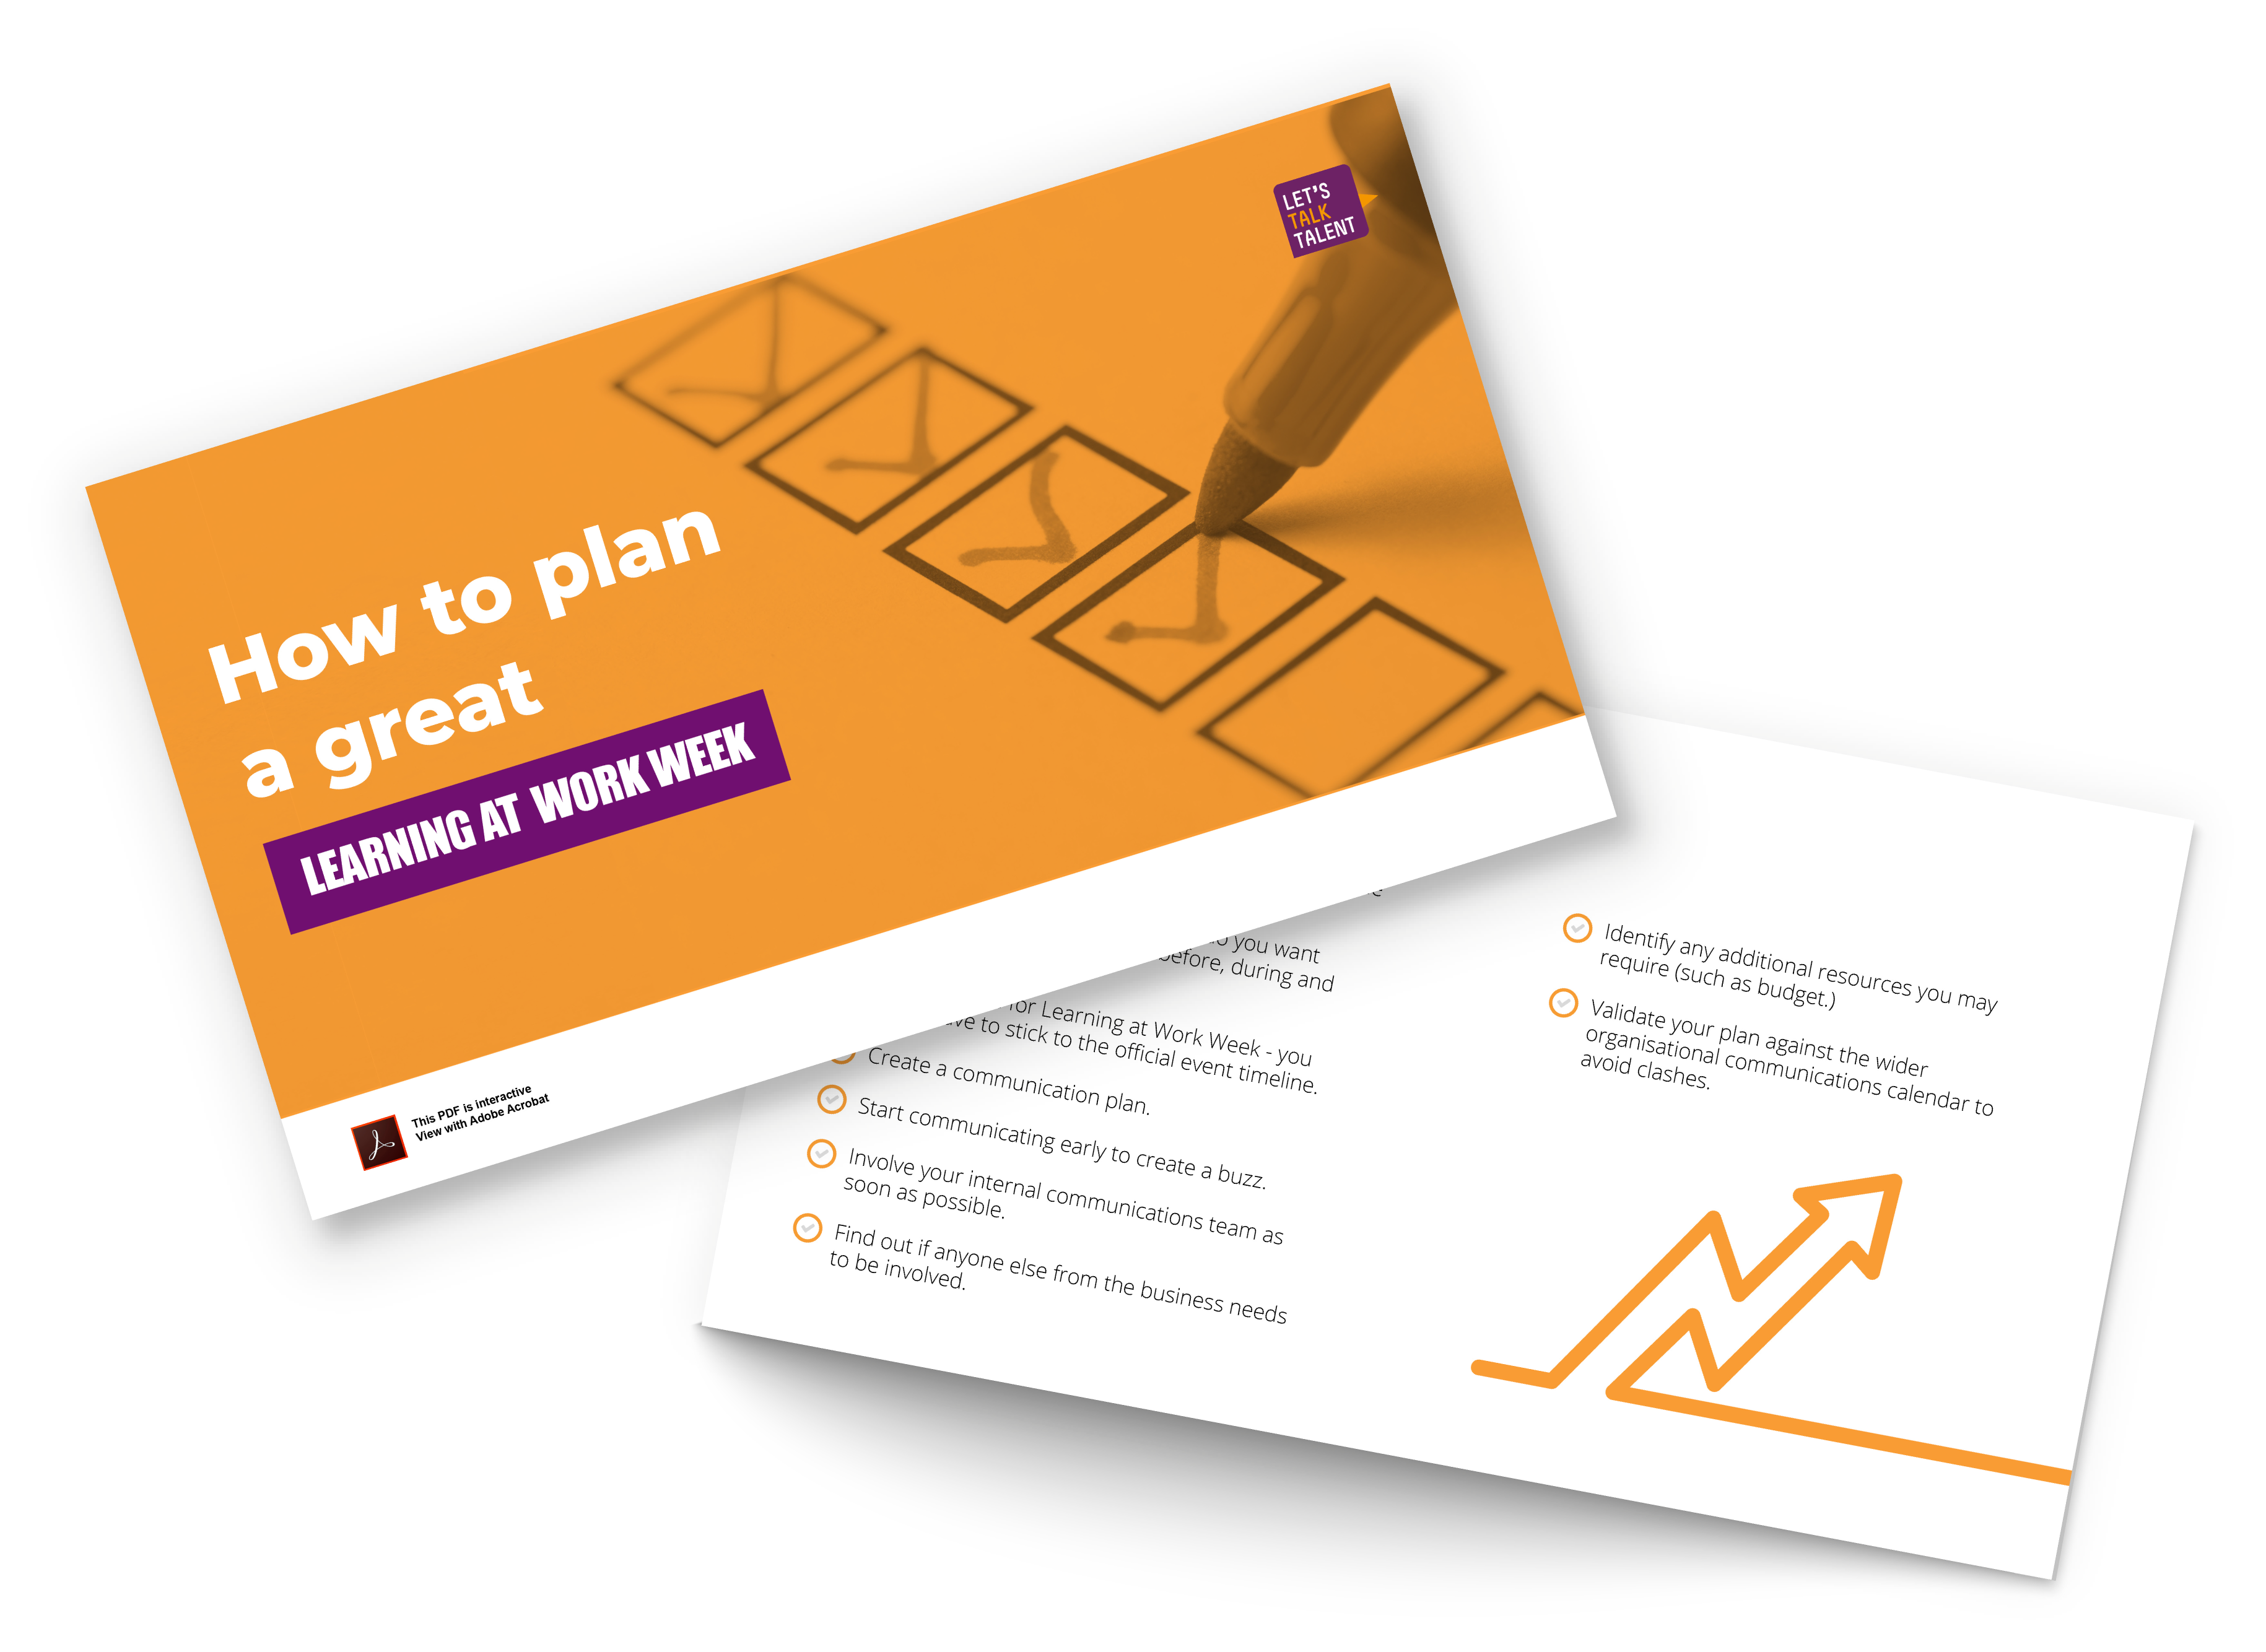 How to plan a great Learning at Work Week Checklist front cover- Lets Talk Talent mockup 2